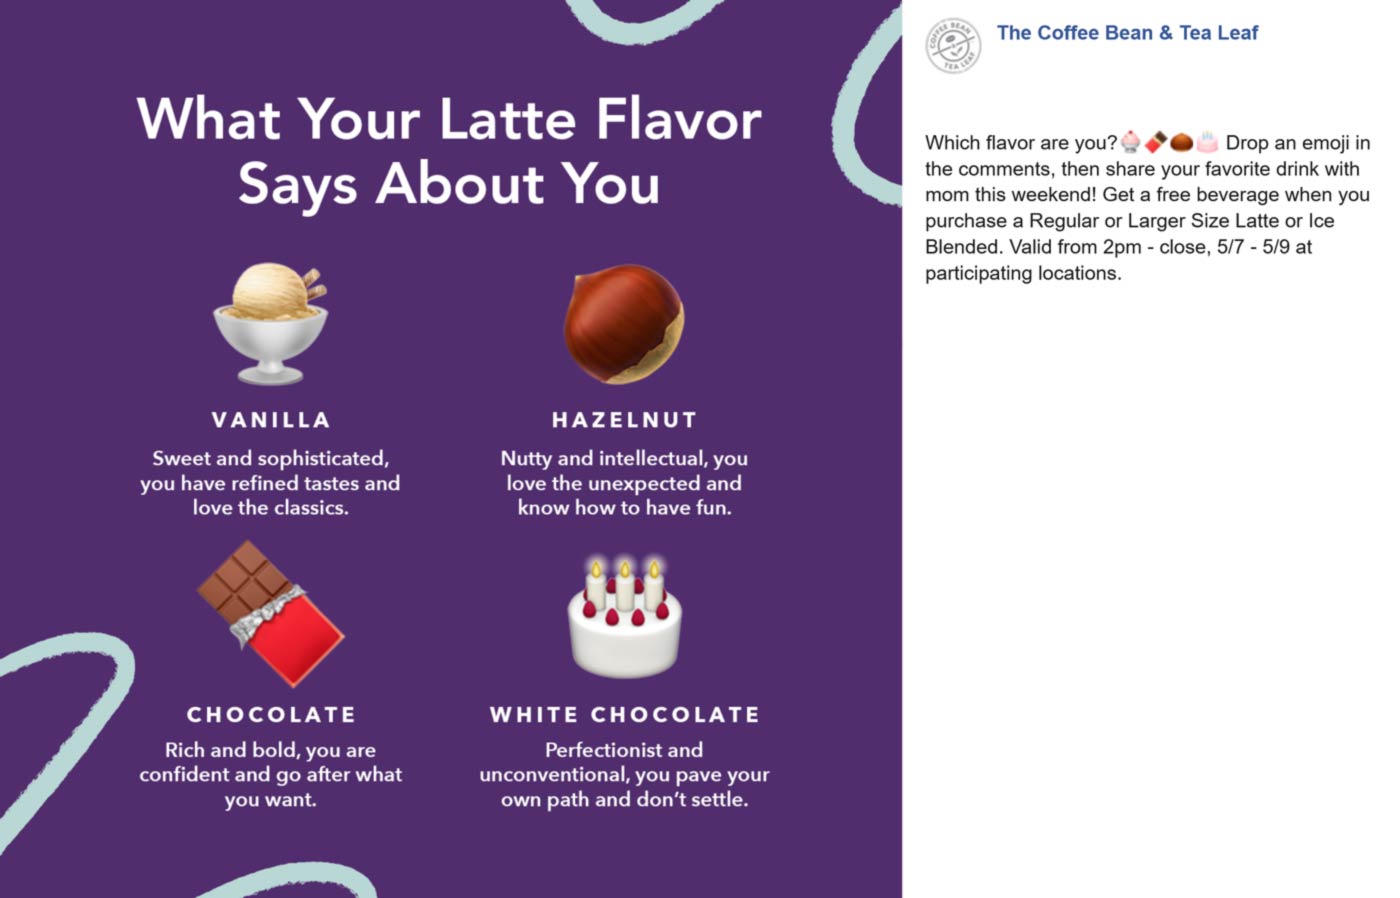 Coffee Bean & Tea Leaf restaurants Coupon  Second drink free after 2p at The Coffee Bean & Tea Leaf #coffeebeantealeaf 